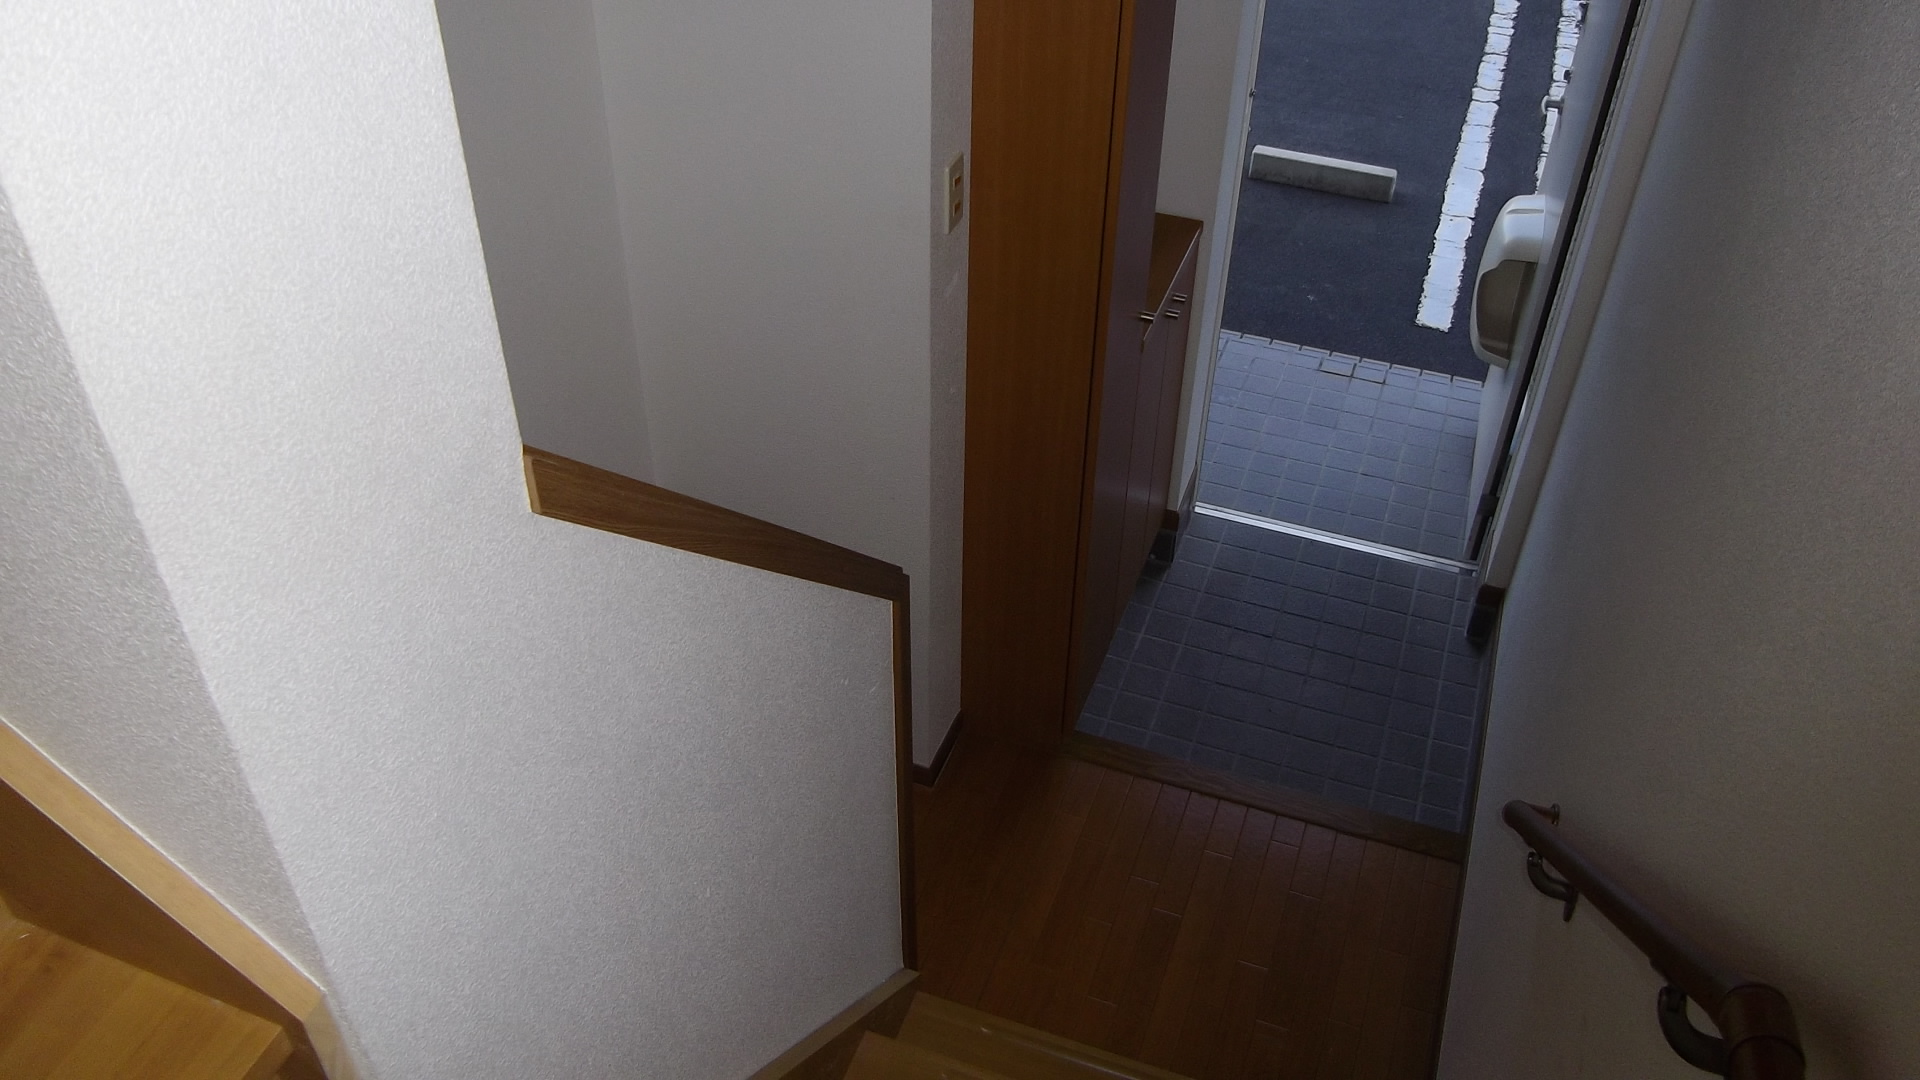 Other room space. Stairs part ・ Stairs under has become the storage.